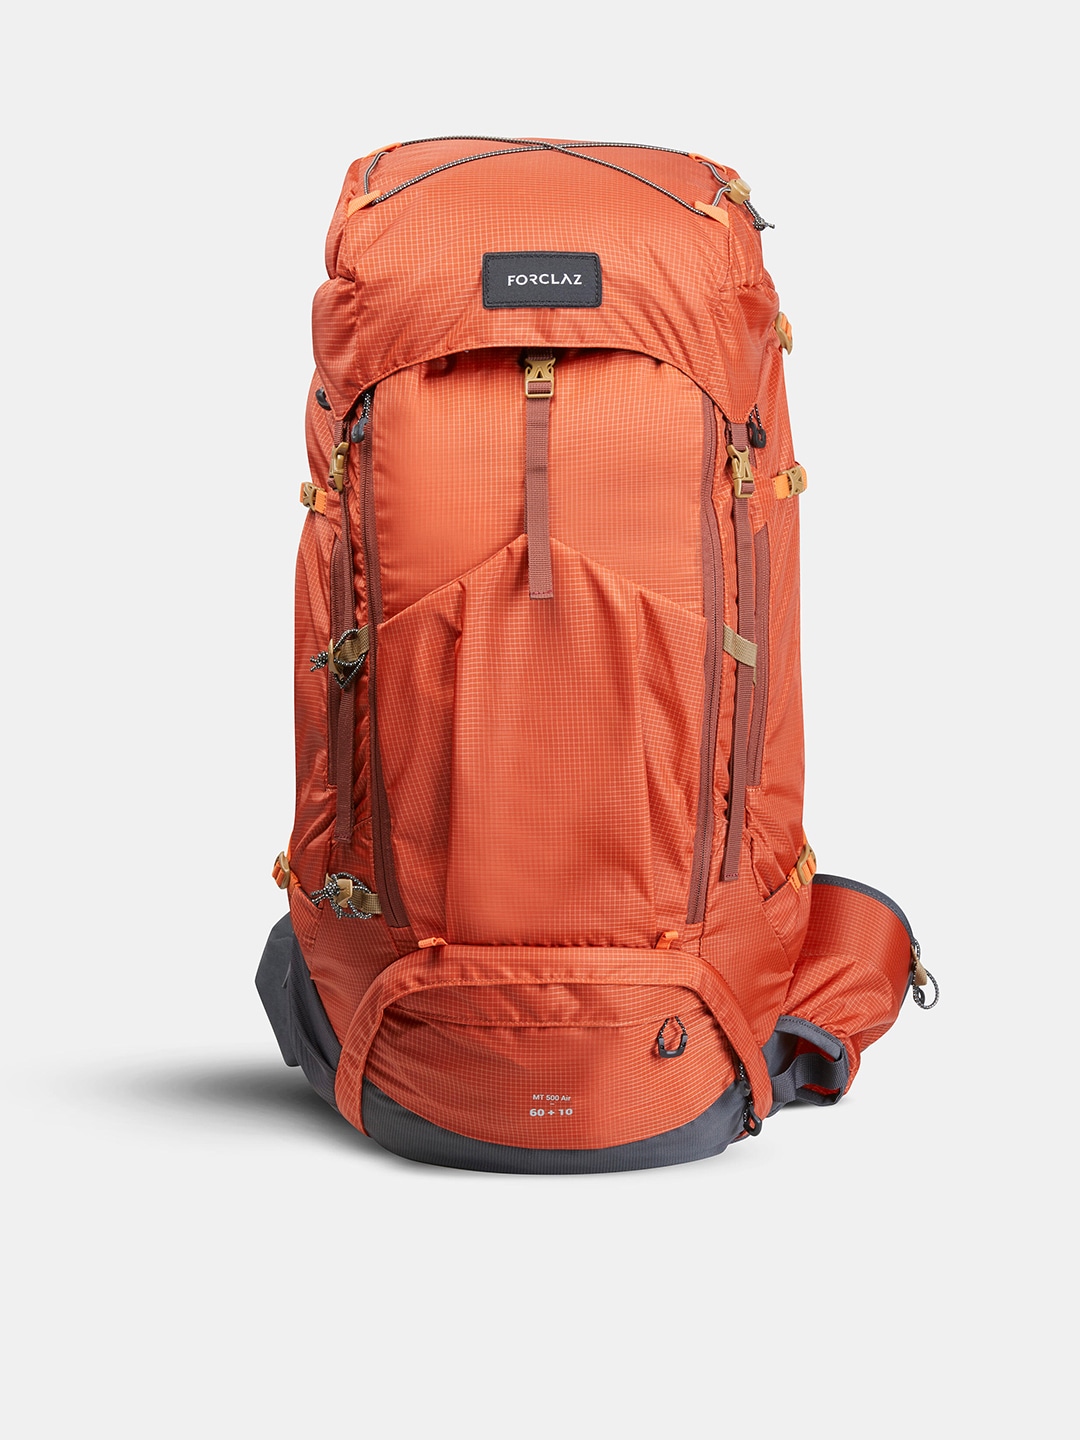 Accessories Backpacks | FORCLAZ By Decathlon Unisex Orange & Mustard Solid Compression Straps Backpack - YK62761